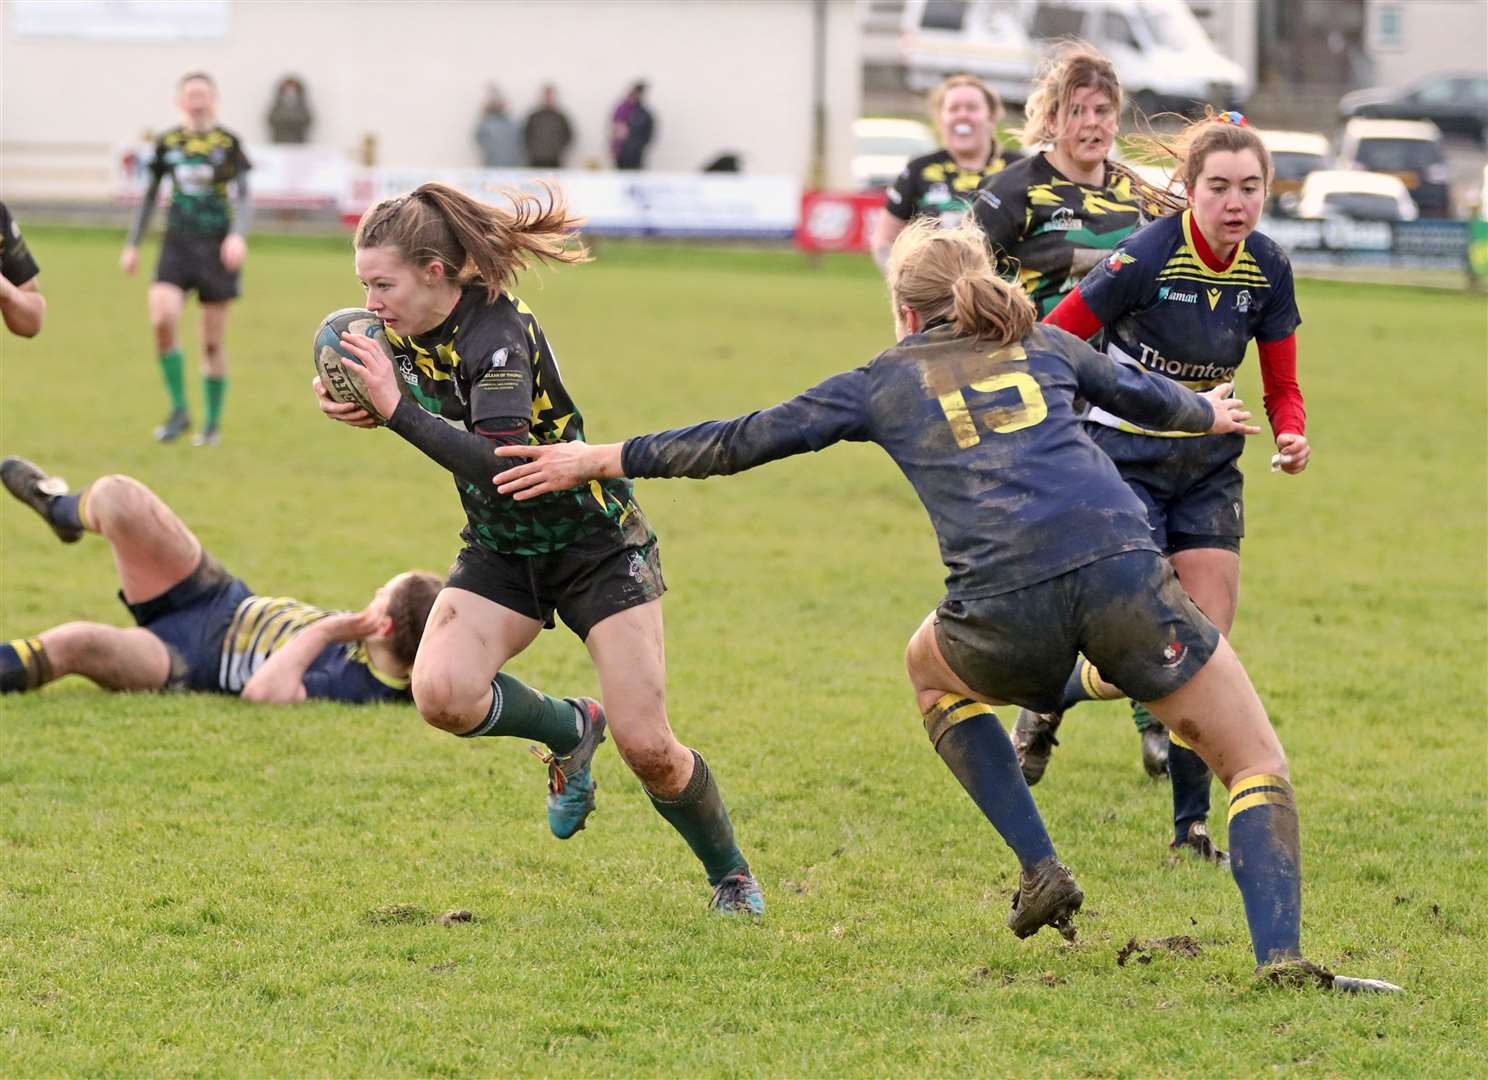 Caitlin Harvey on her way to scoring a try in the 116-0 thrashing of Dundee Valkyries 2nd XV at Millbank. Picture: James Gunn